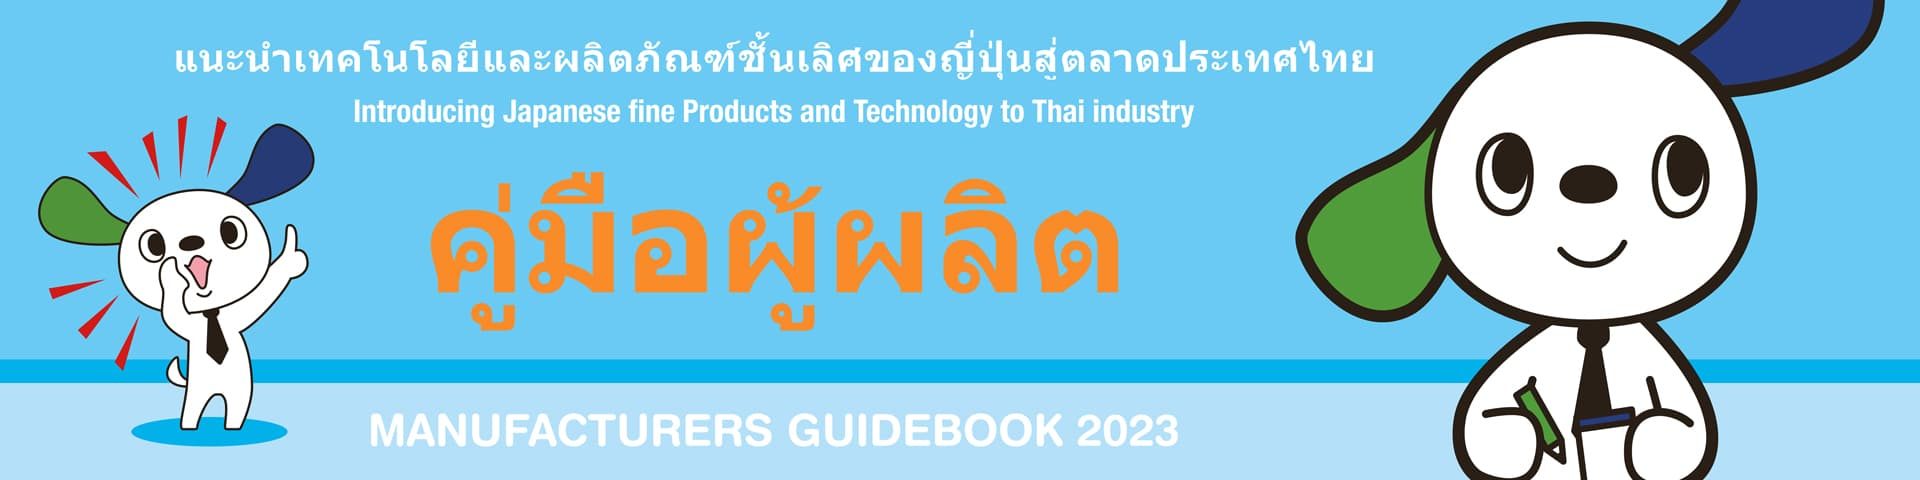 MANUFACTURERS GUIDEBOOK THAI 2022 by THE DAILY INDUSTRIAL NEWS